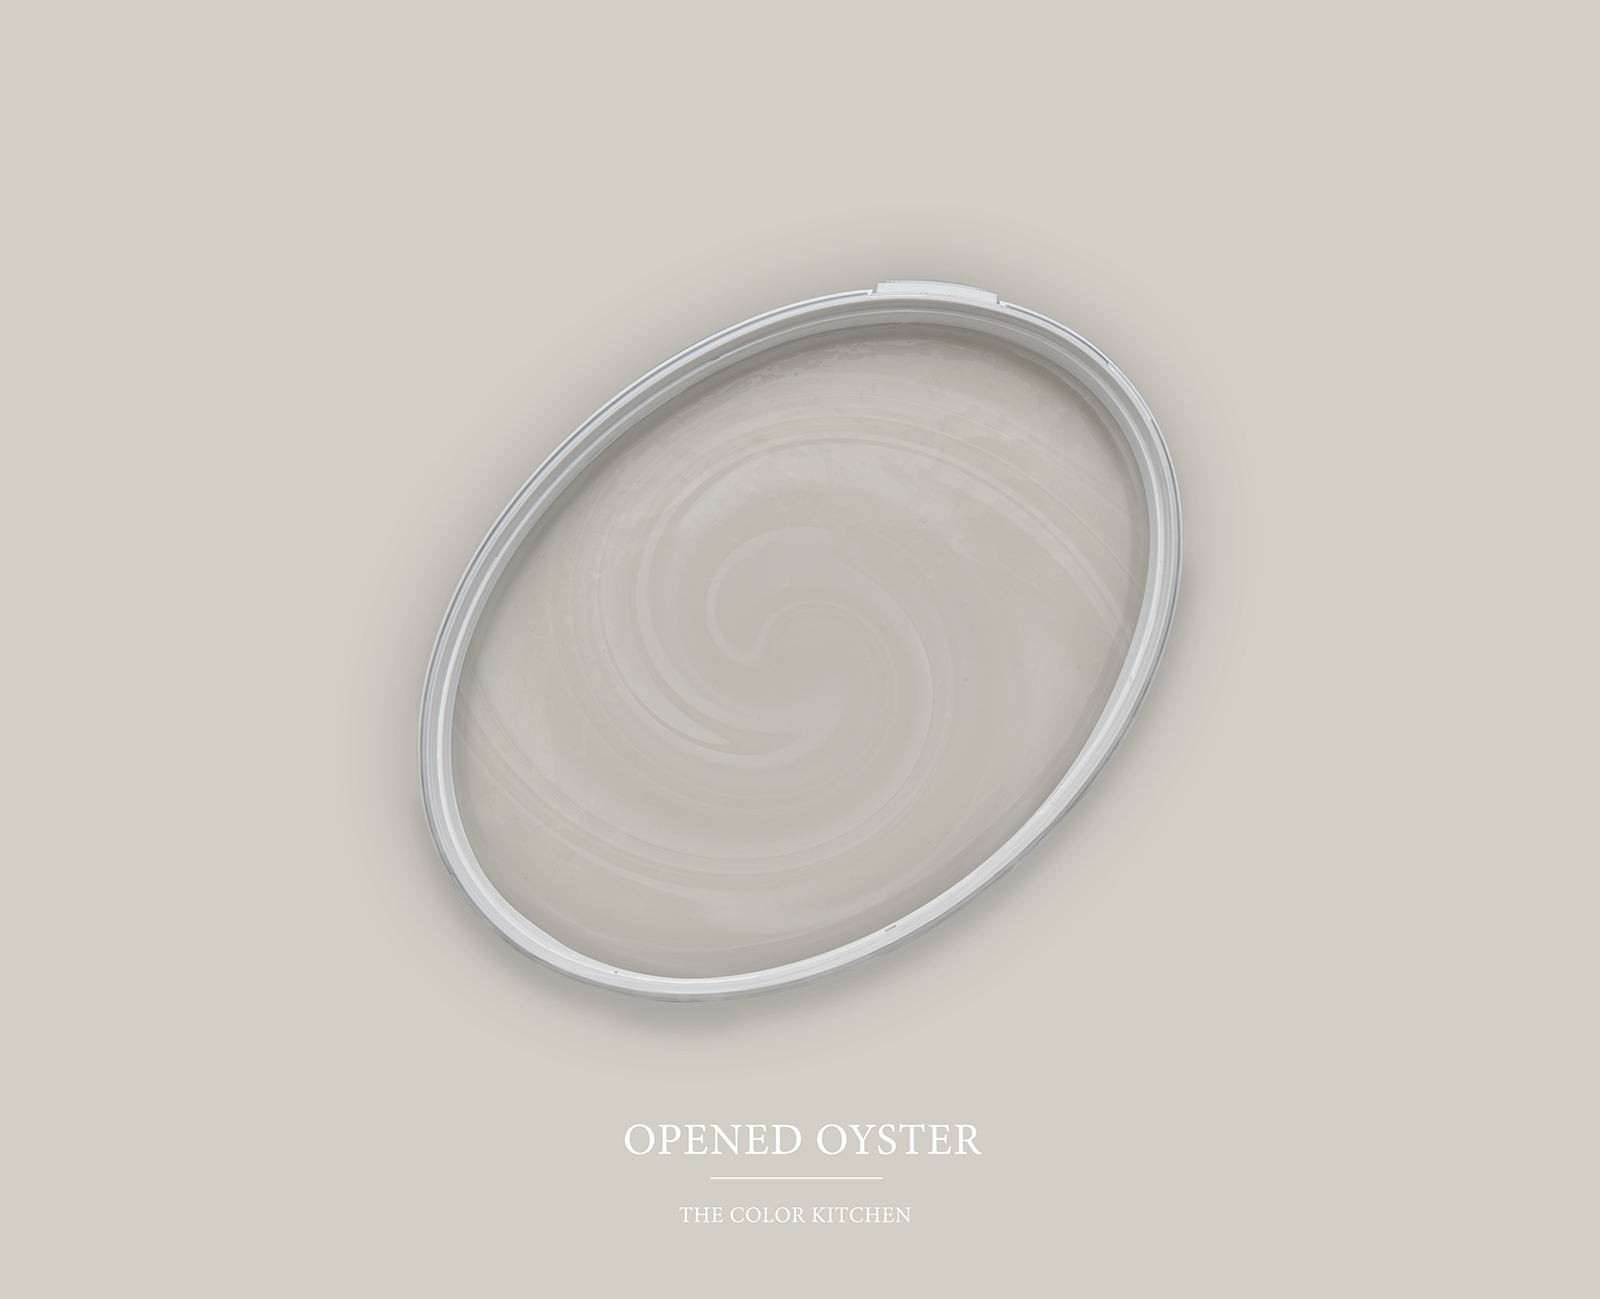         Wall Paint TCK1016 »Opened Oyster« in soft grey – 2.5 litre
    